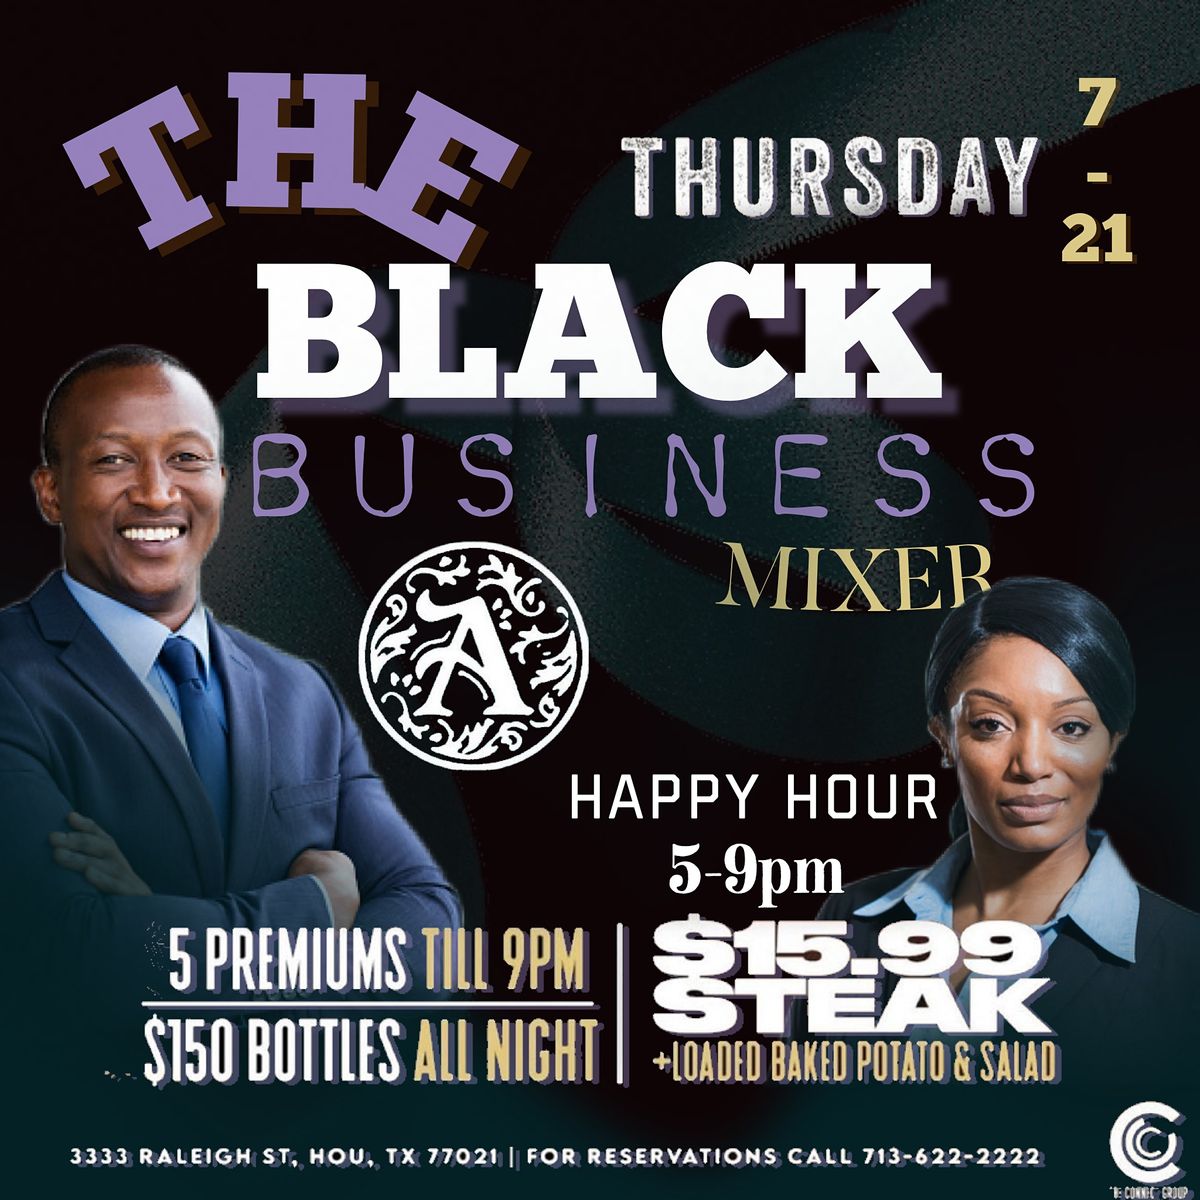 The Black Business Mixer